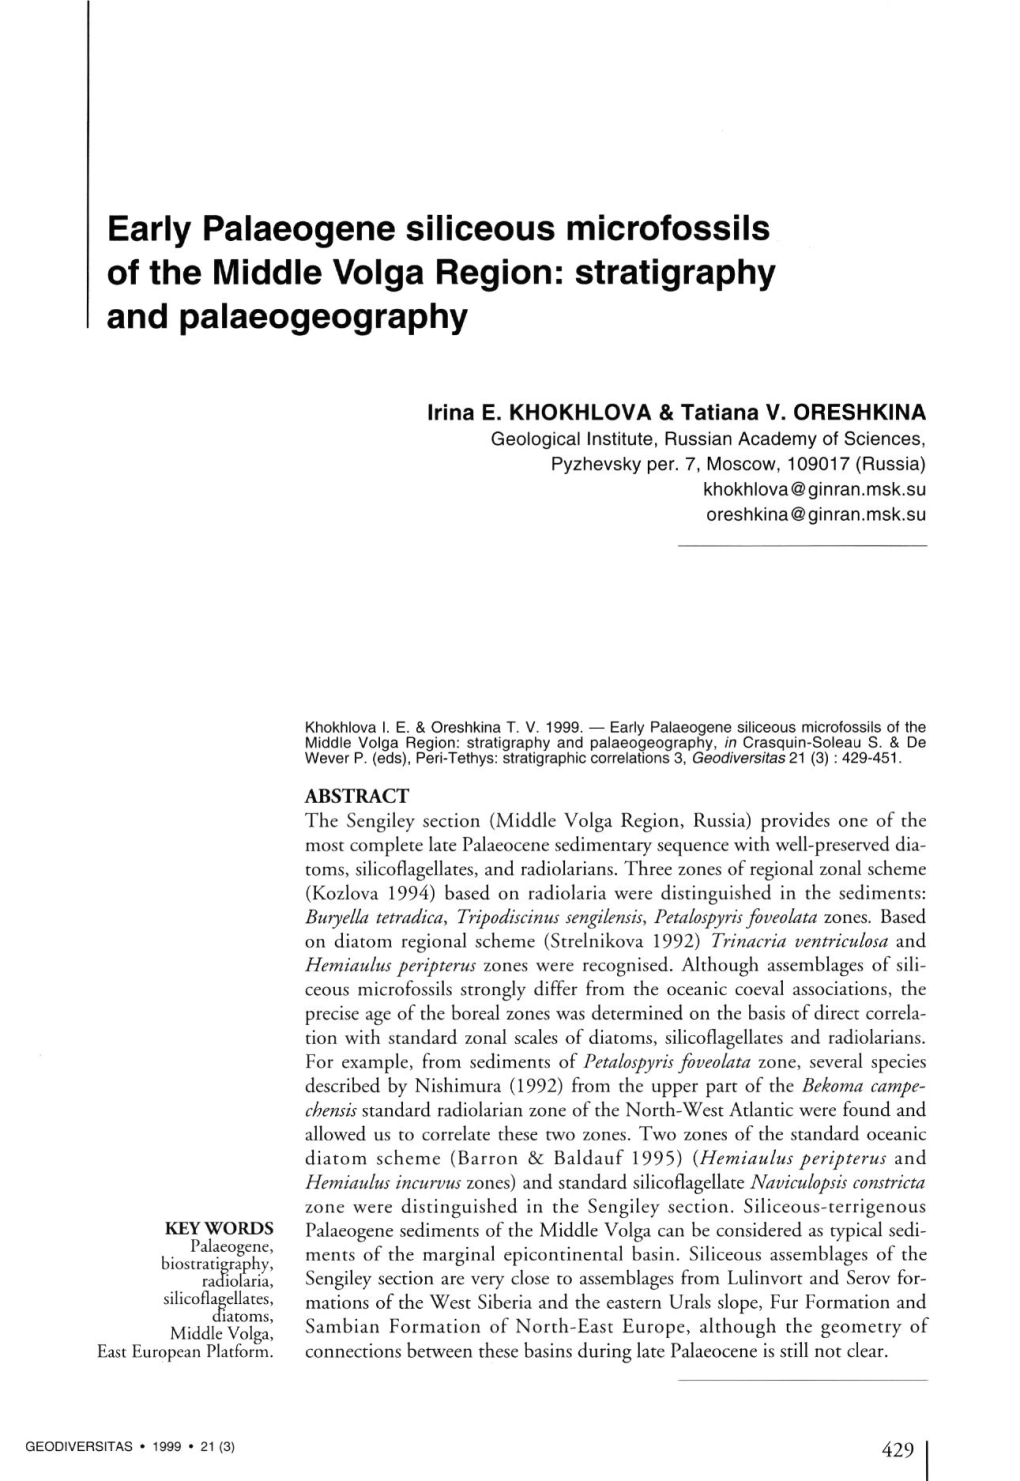 Early Palaeogene Siliceous Microfossils of the Middle Volga Region: Stratigraphy and Palaeogeography